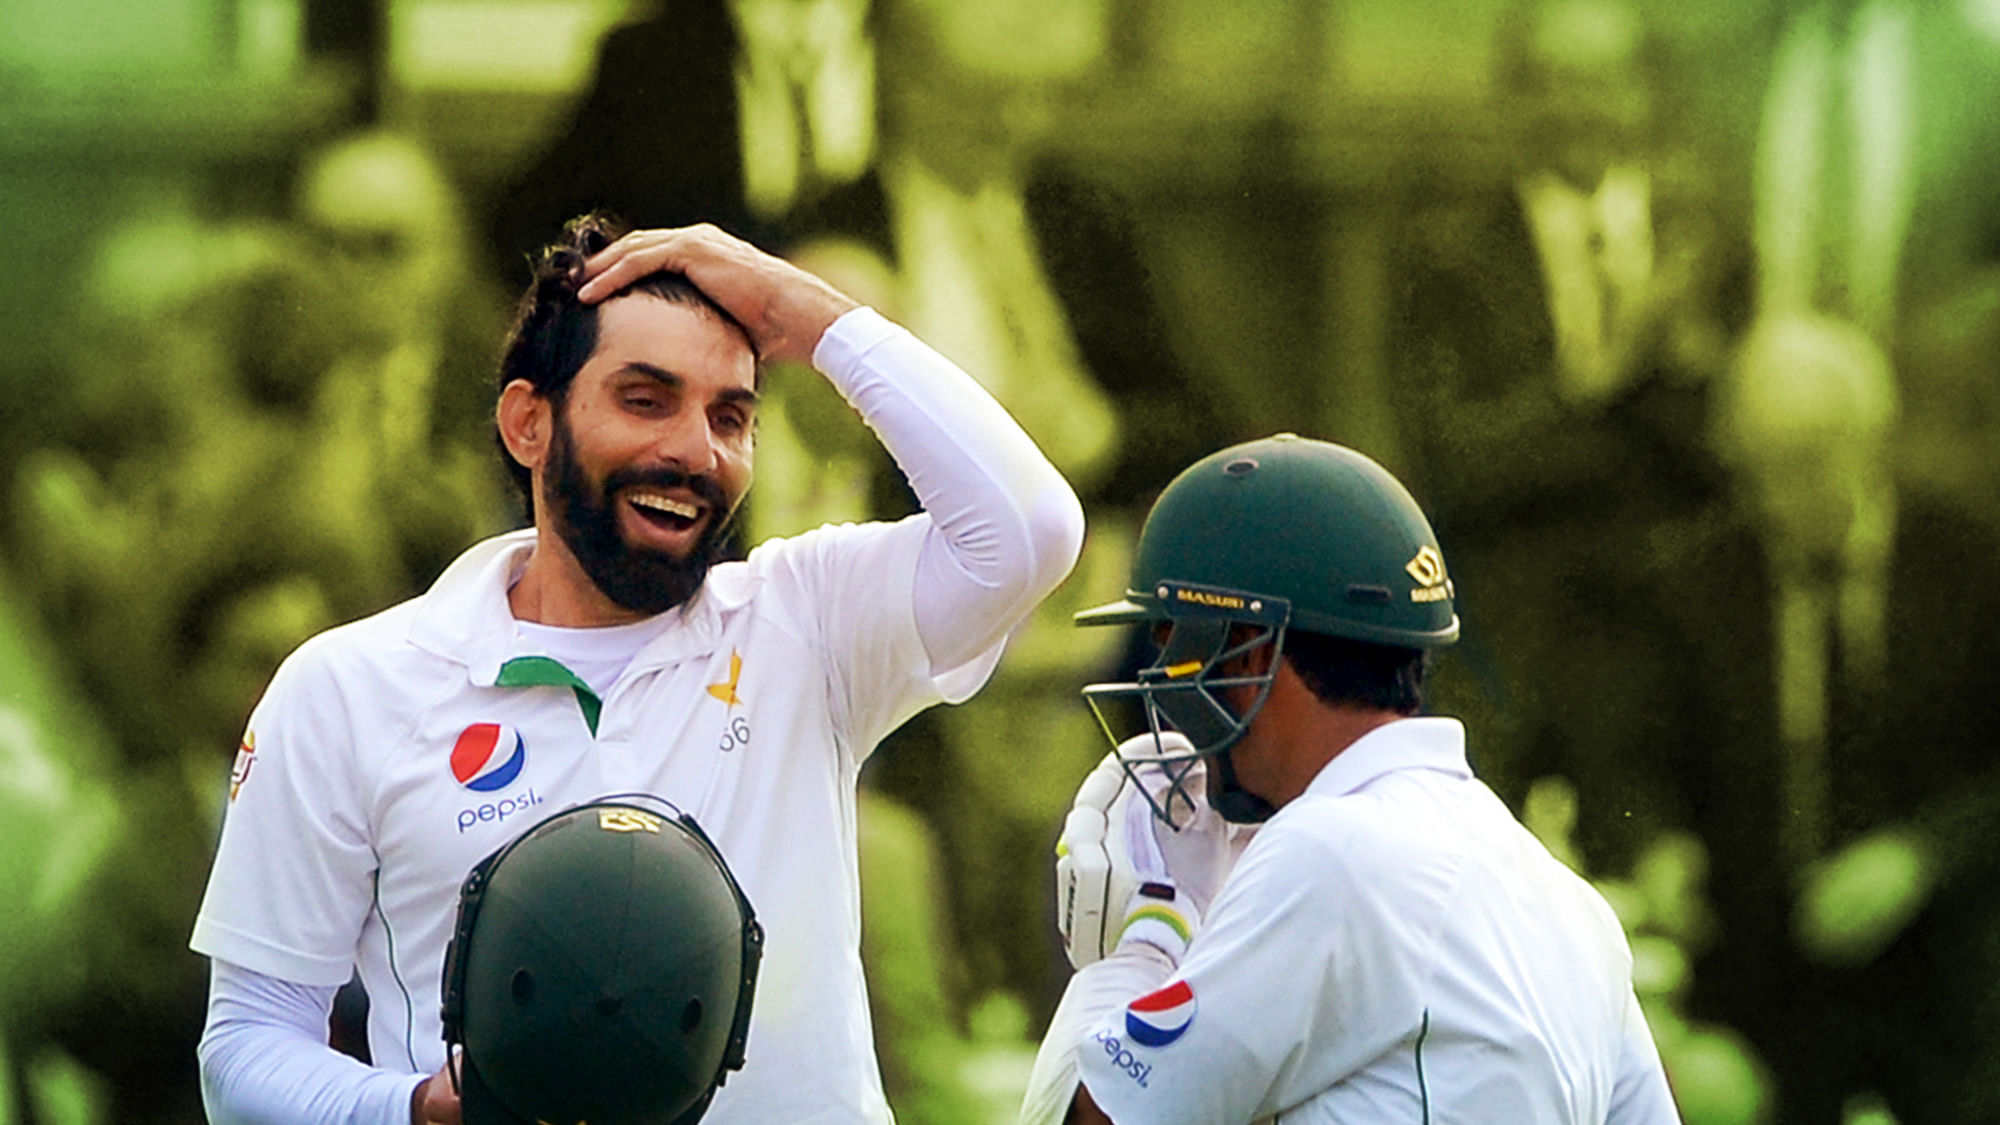 According to a report in thenews.com.pk, Misbah is emerging as one of the top contenders to secure the recently vacated spot of Arthur.  